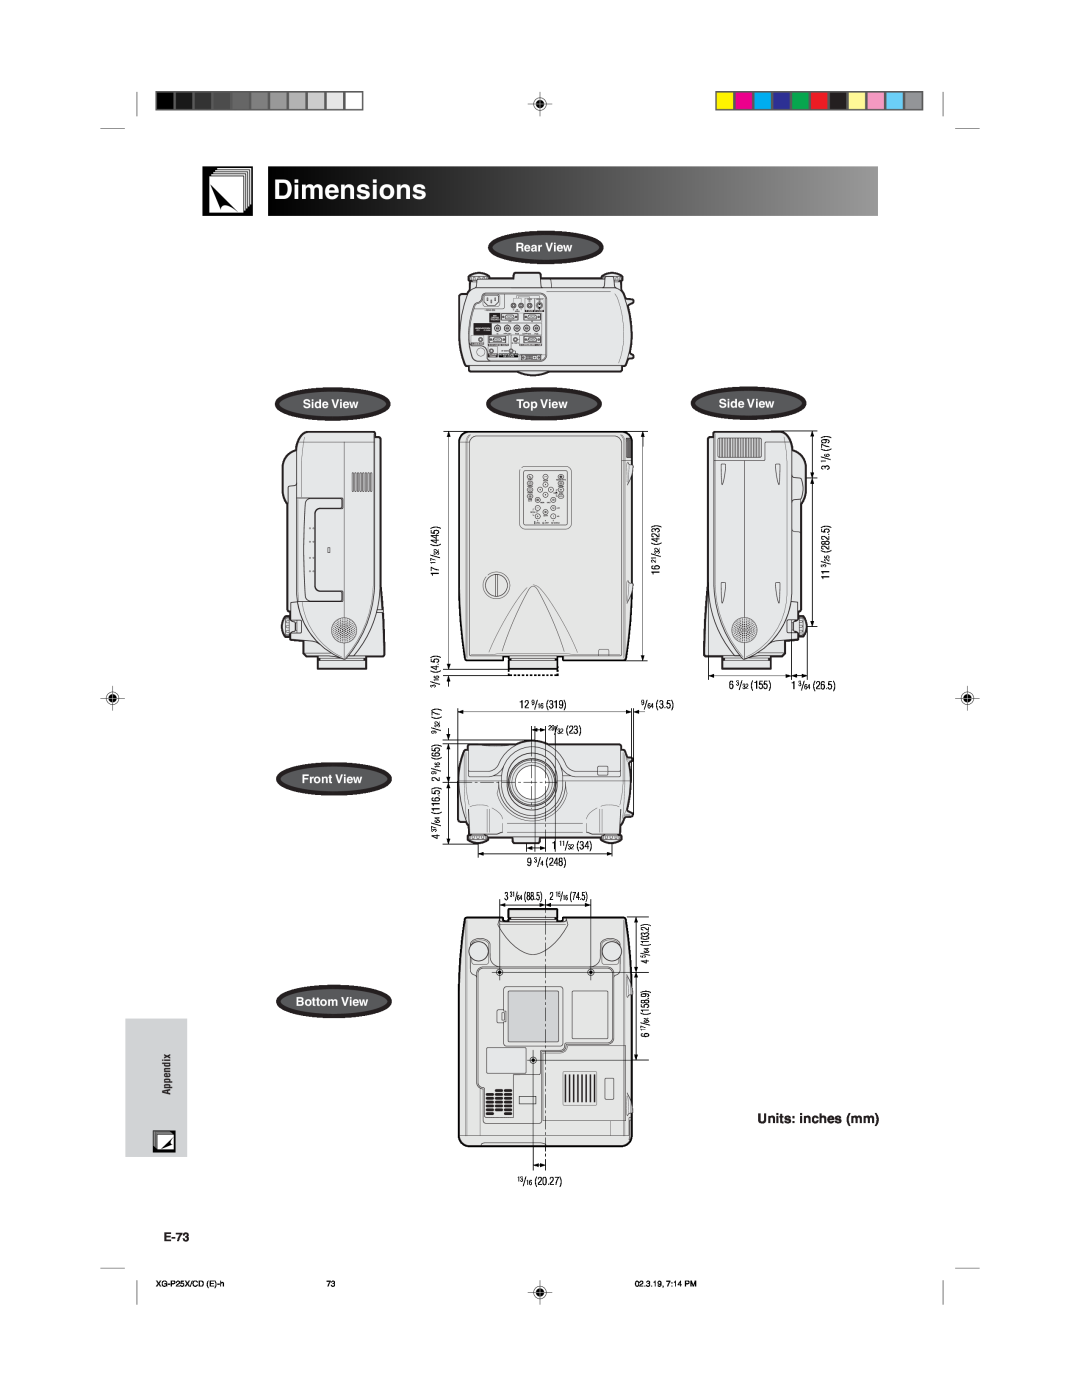 Sharp XG-P25X operation manual Dimensions, Units inches mm, Side View Front View, Rear View Top View, Bottom View 